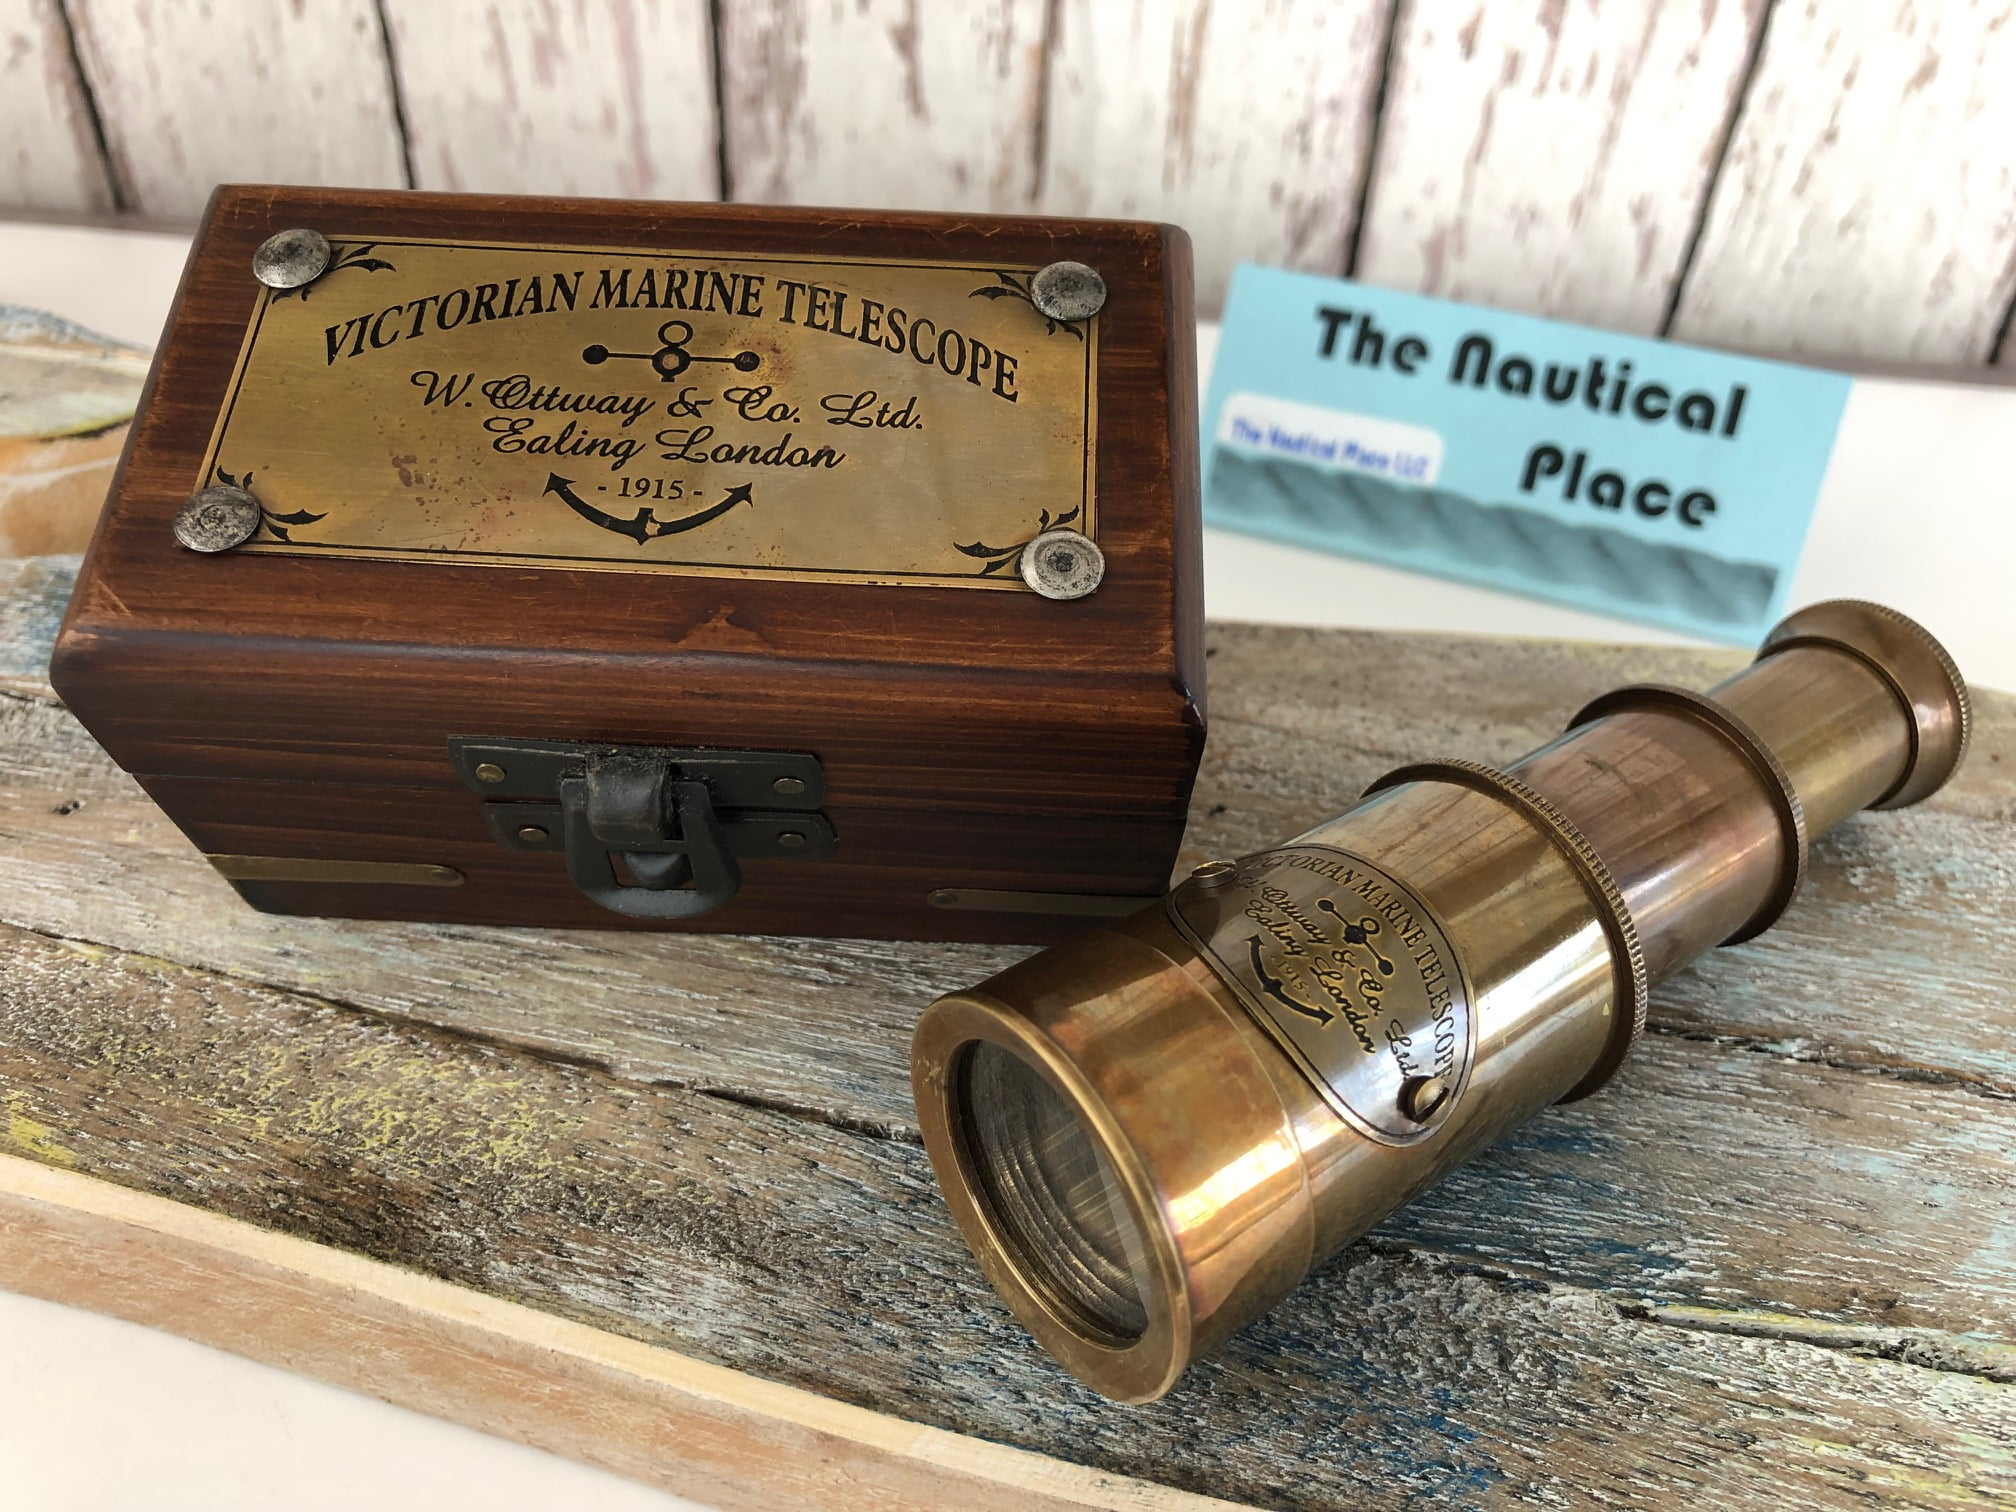 Nautical Brass Antique Telescope Spyglass with Wooden Stand Home Decor Gift 